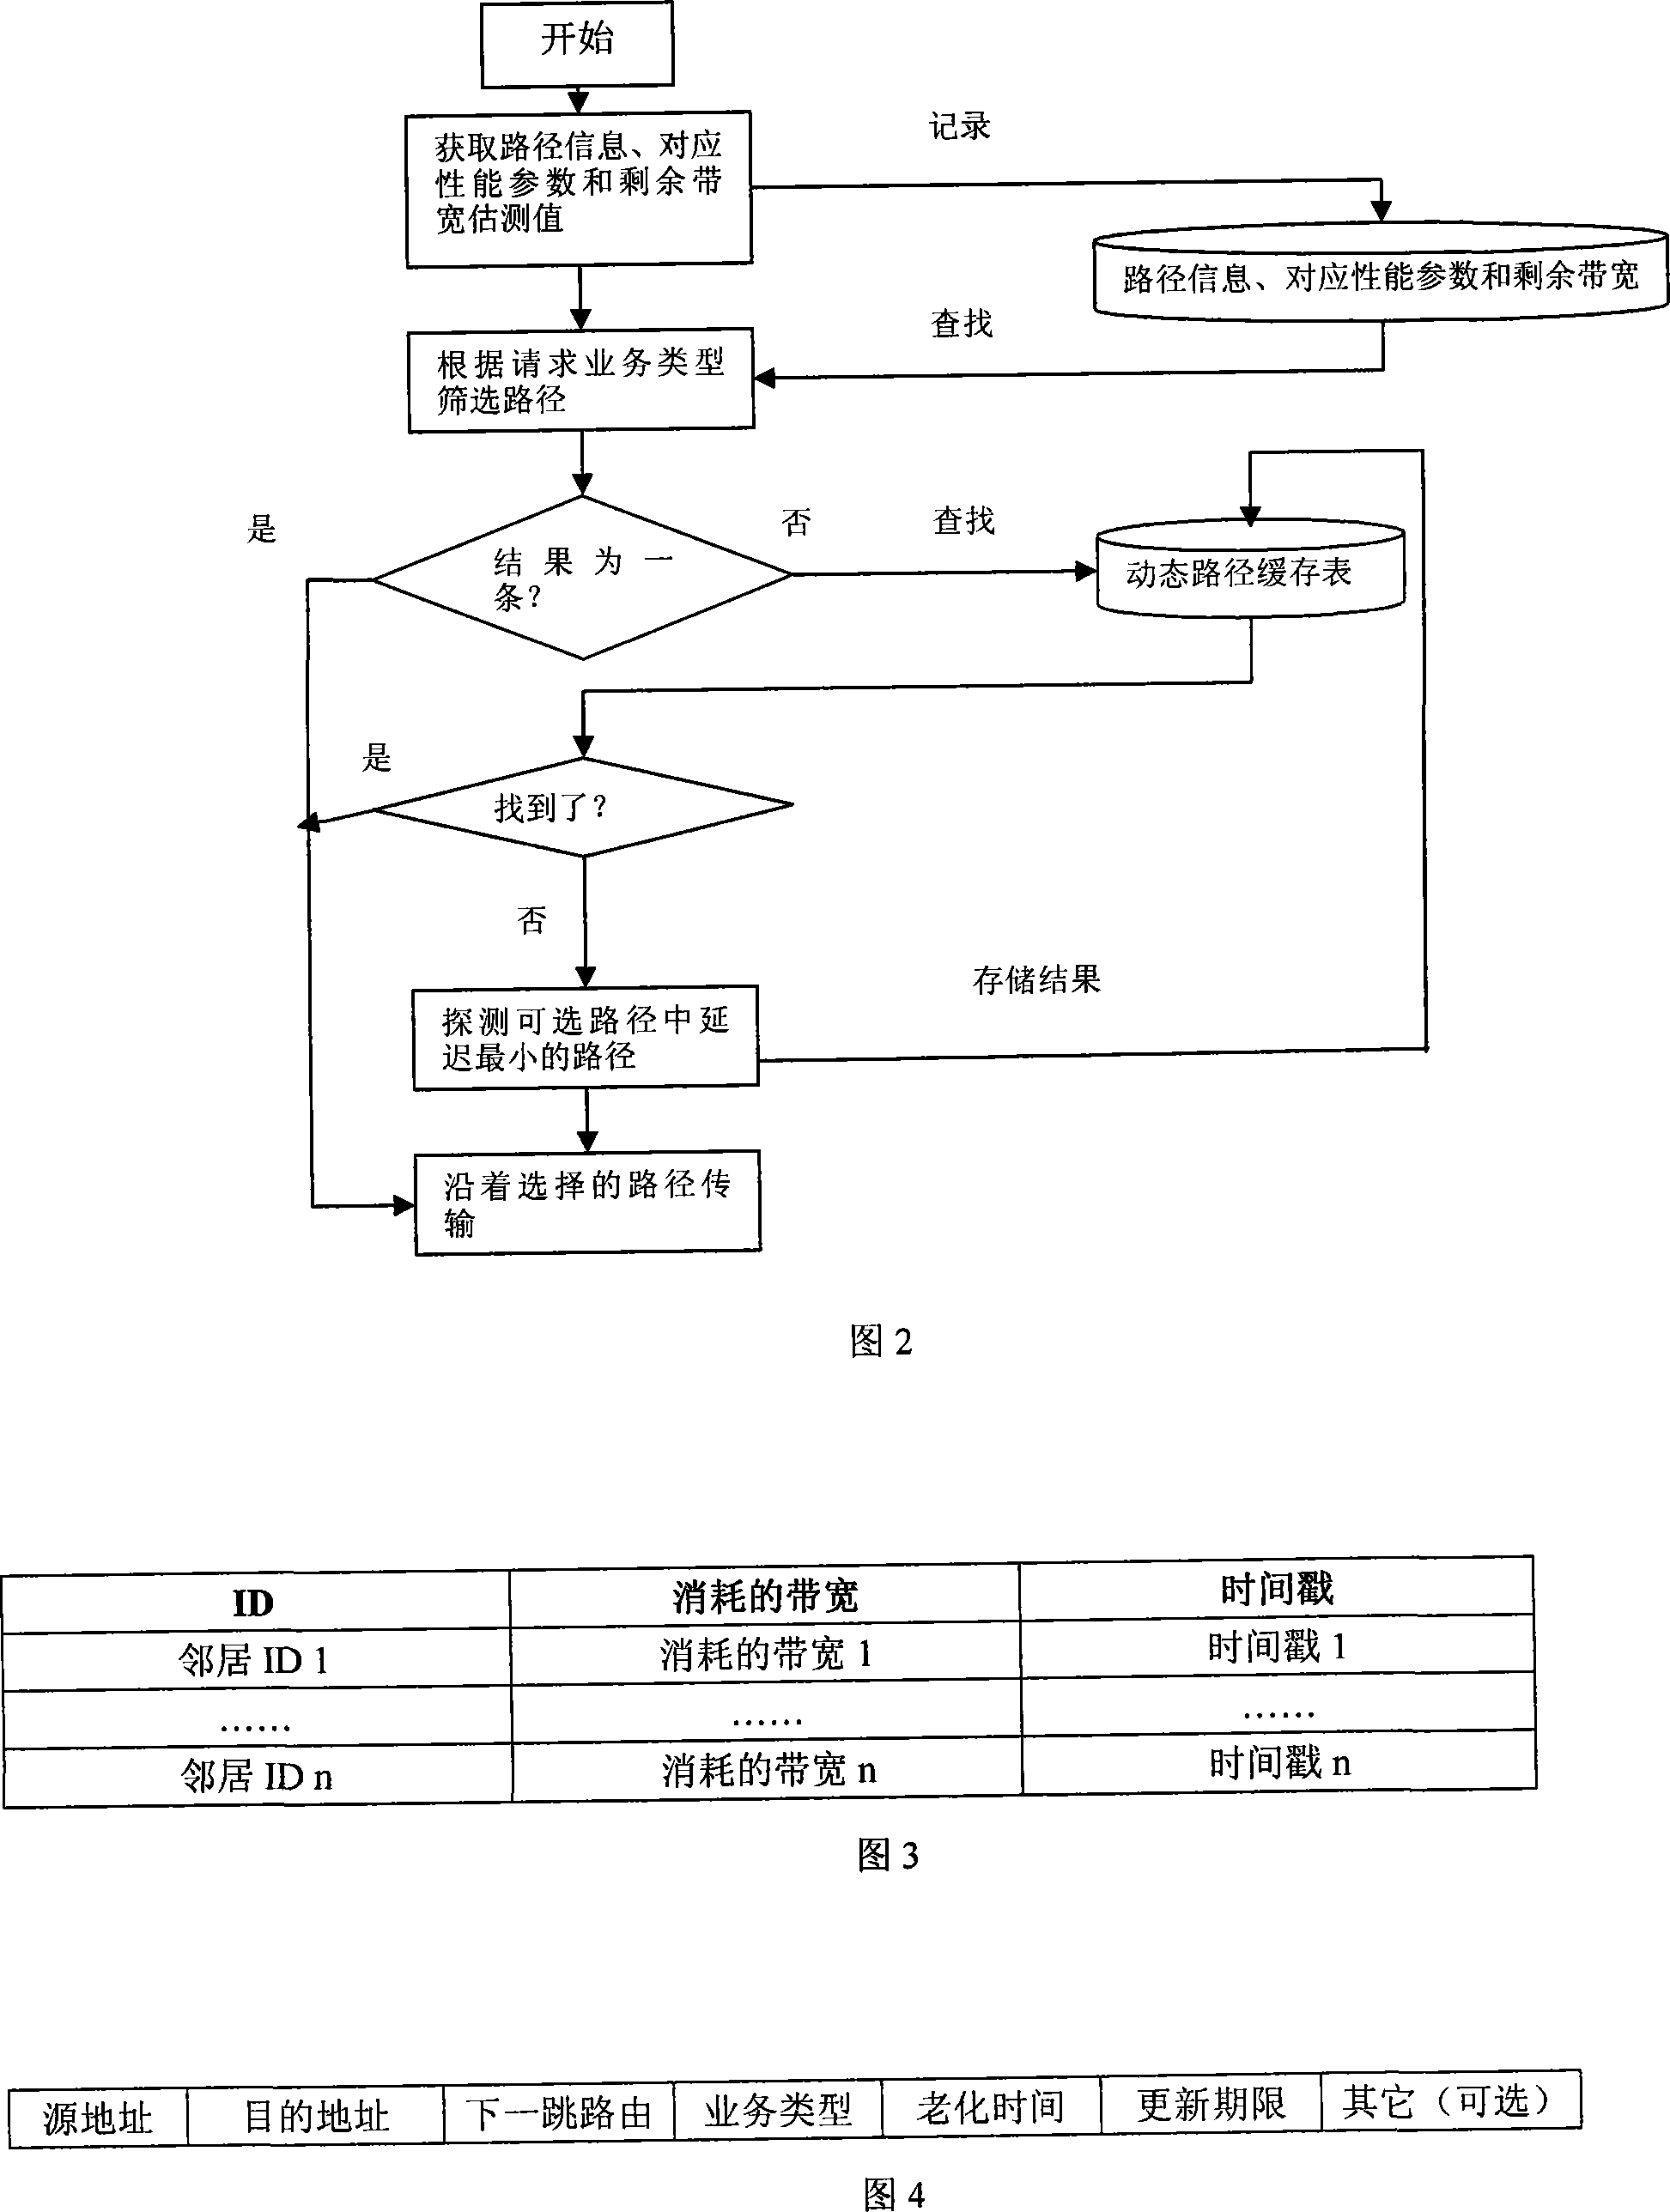 A path selecting method of wireless mesh network